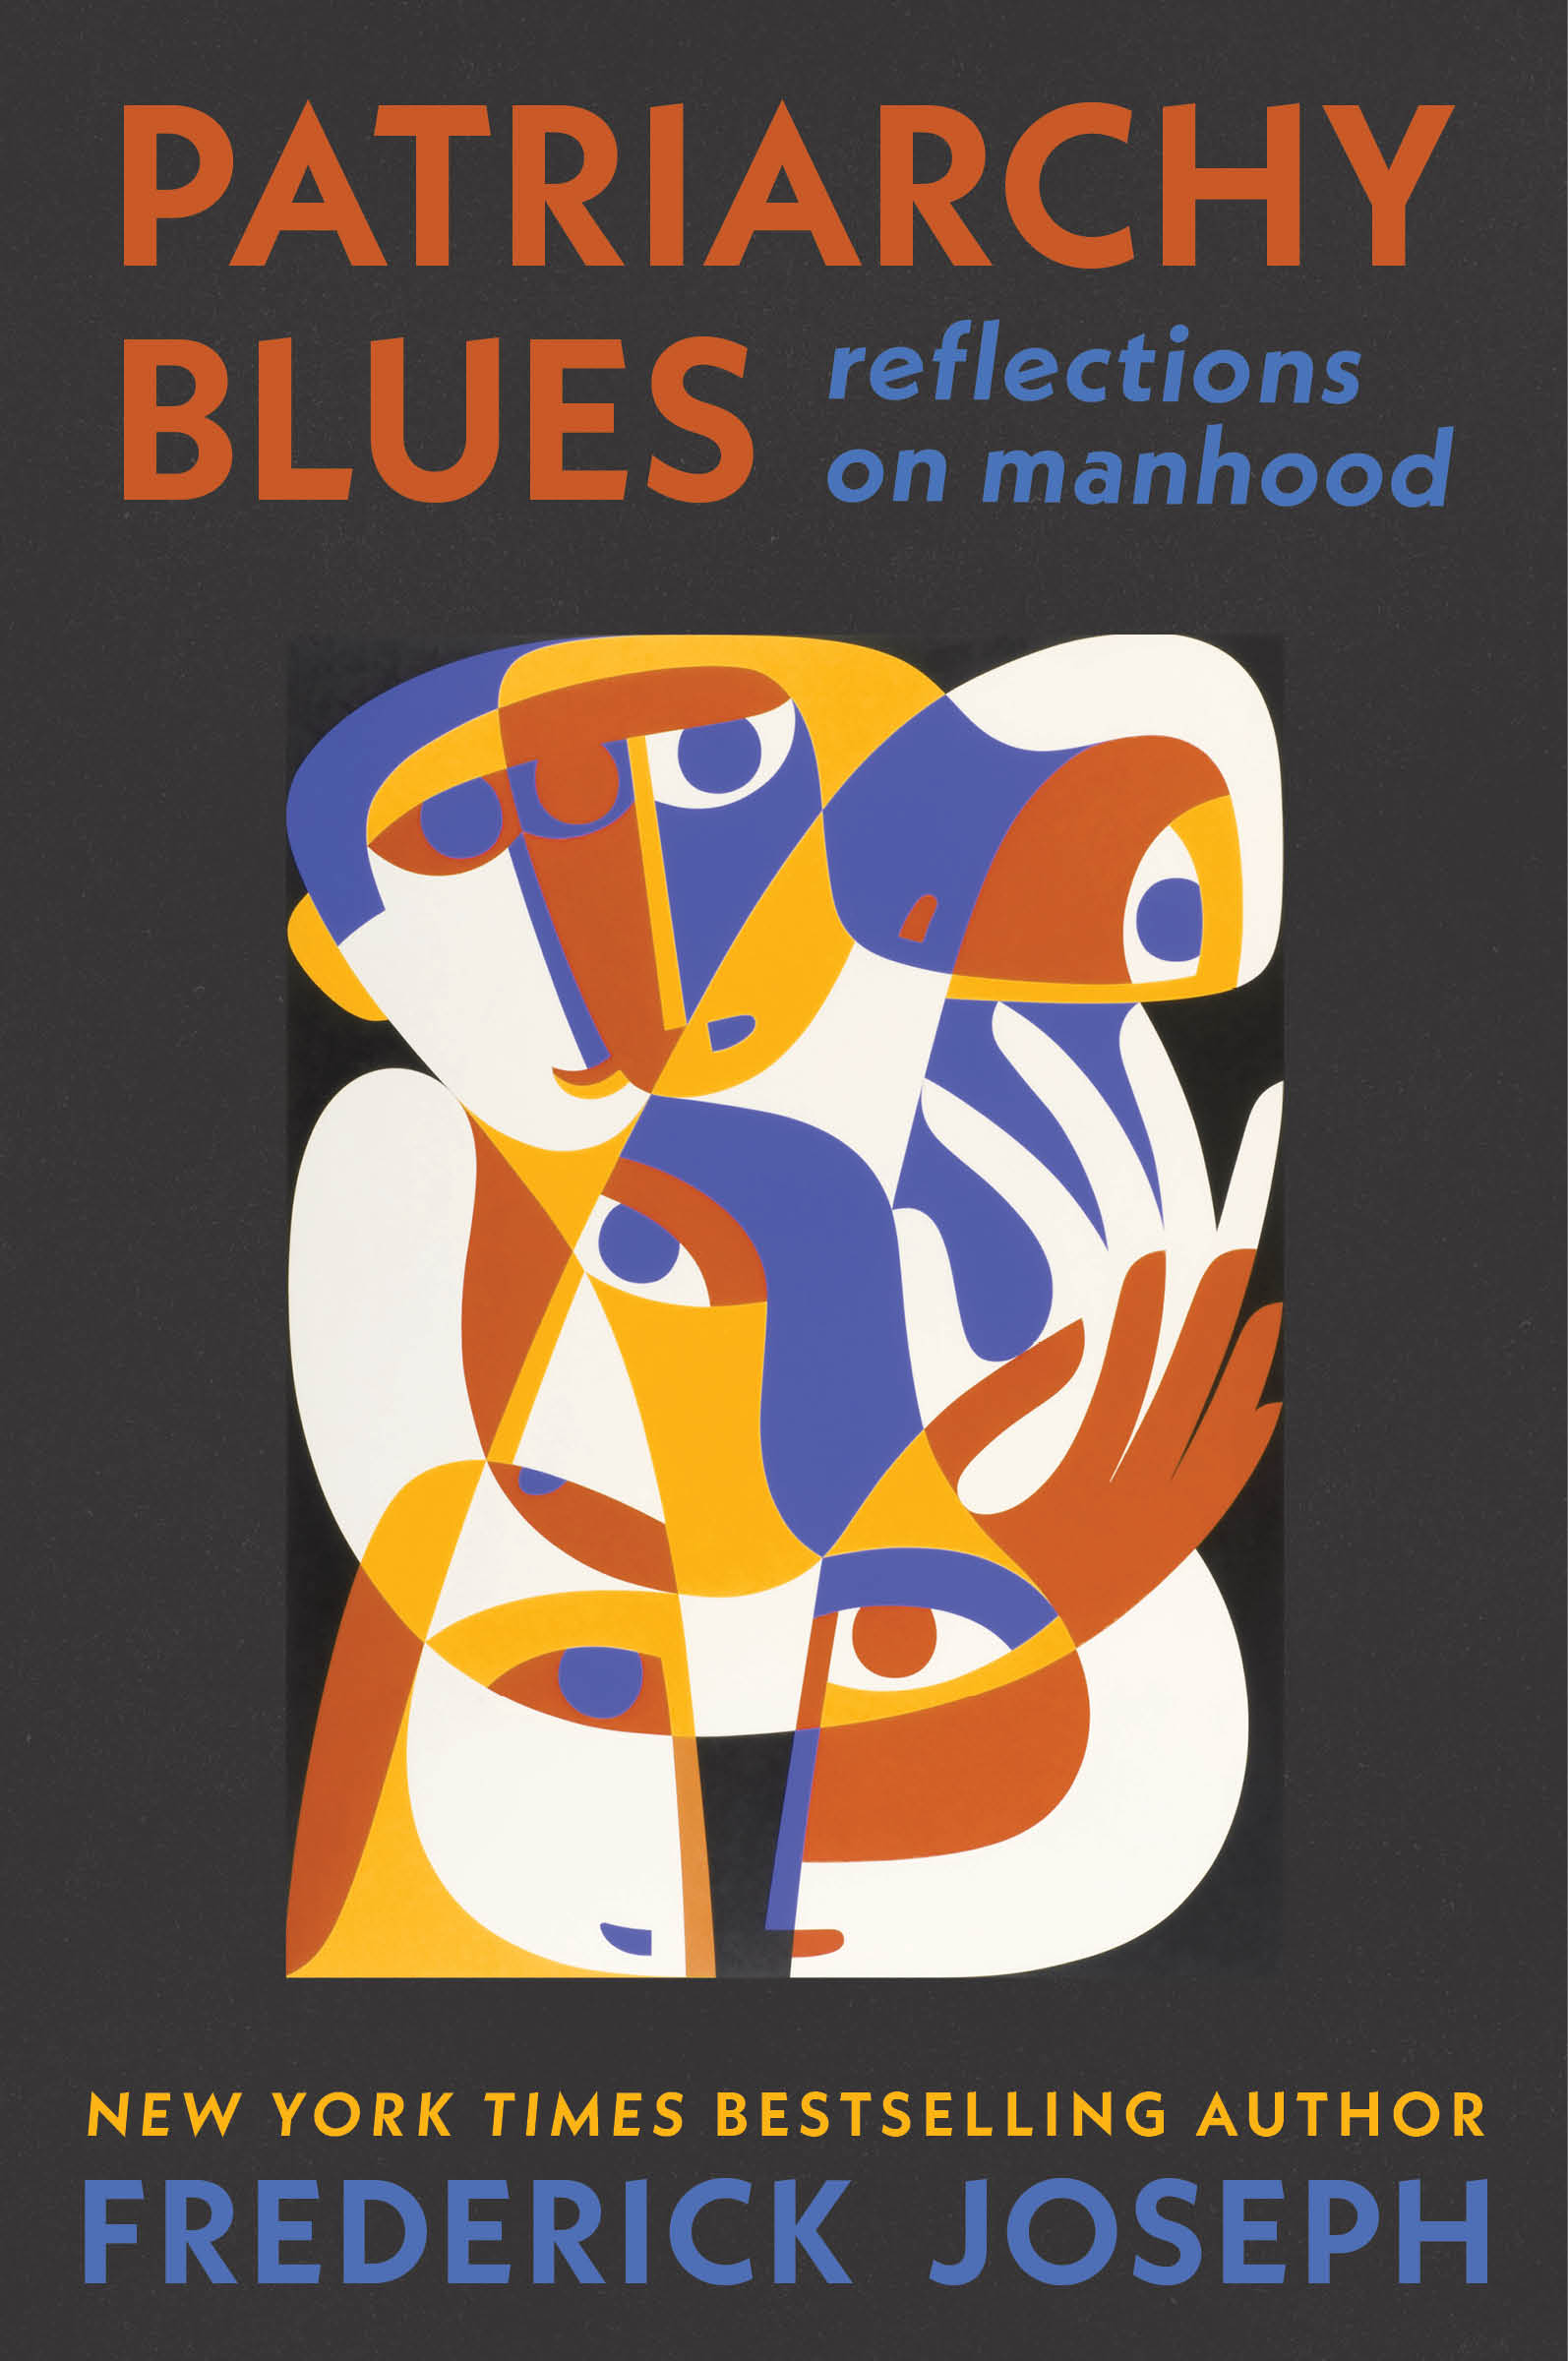 Patriarchy Blues: Reflections on Manhood – Frederick Joseph in Conversation with Jacqui Lewis and Amanda Hambrick Ashcraft